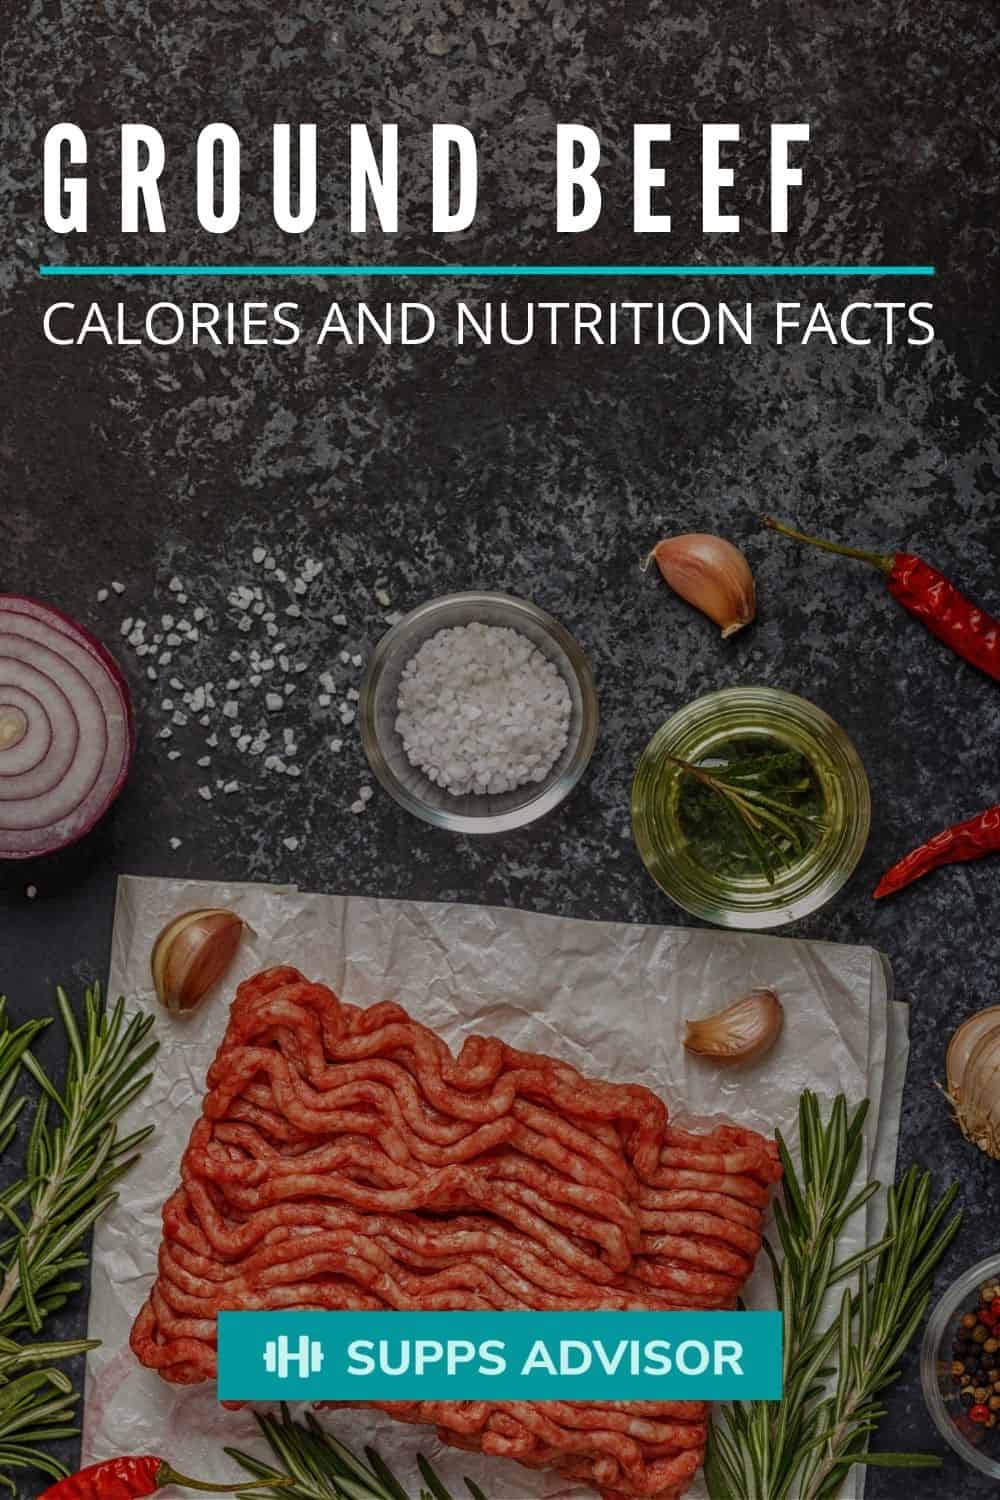 Ground Beef Calories and Ground Beef Nutrition Facts - know your beef!